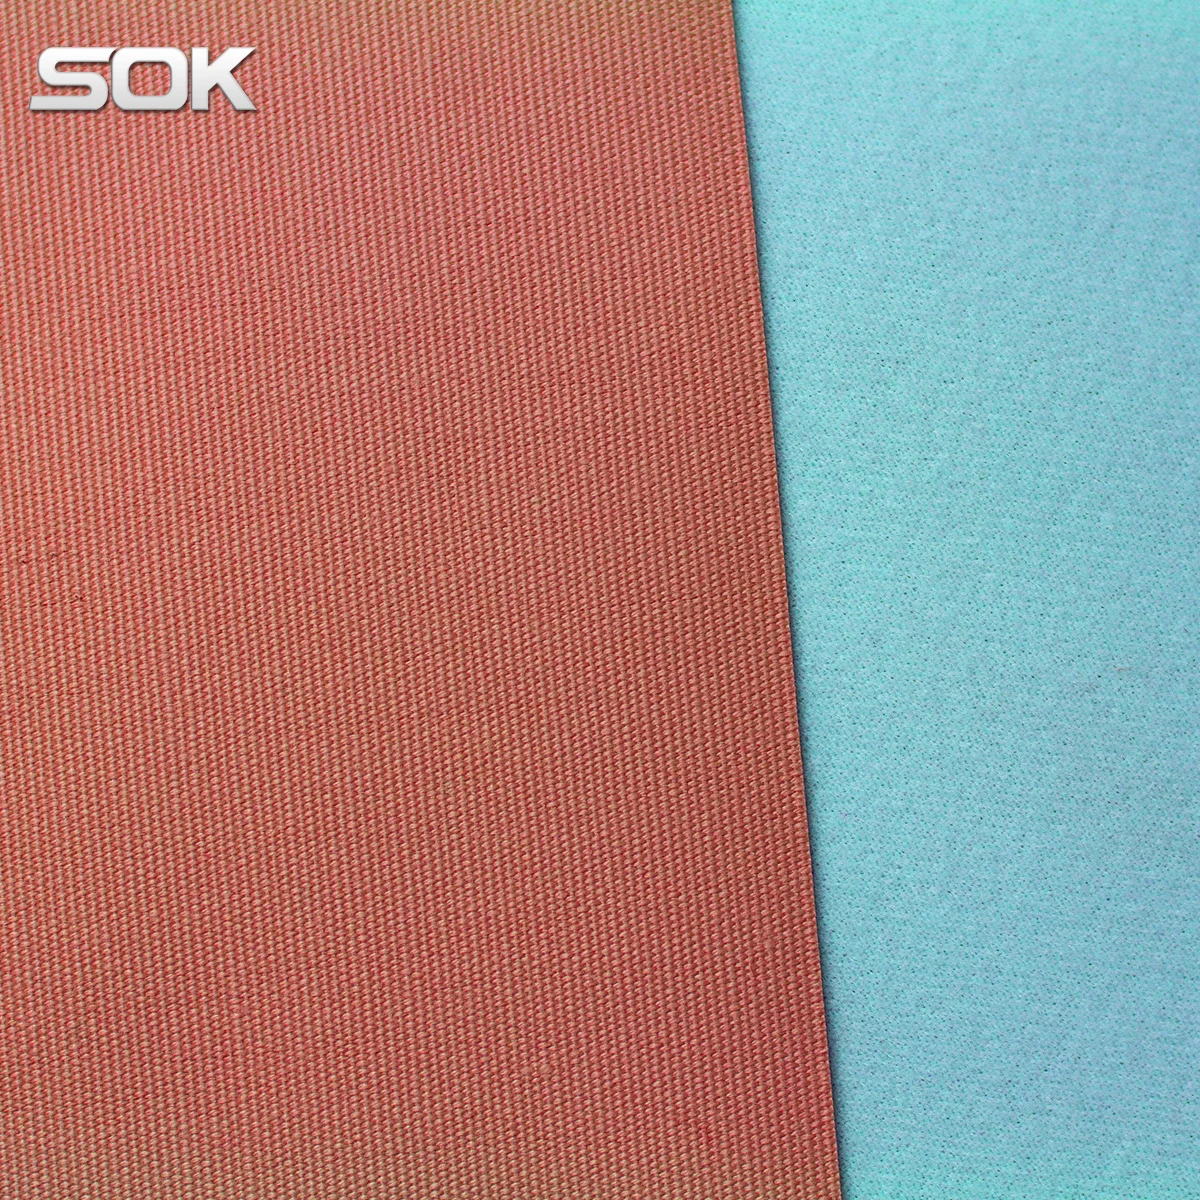 
100% Solution dyed acrylic fabric for outdoor Tent Umbrella Color fastness to light AATCC 2000H 4.5 ORANGE 